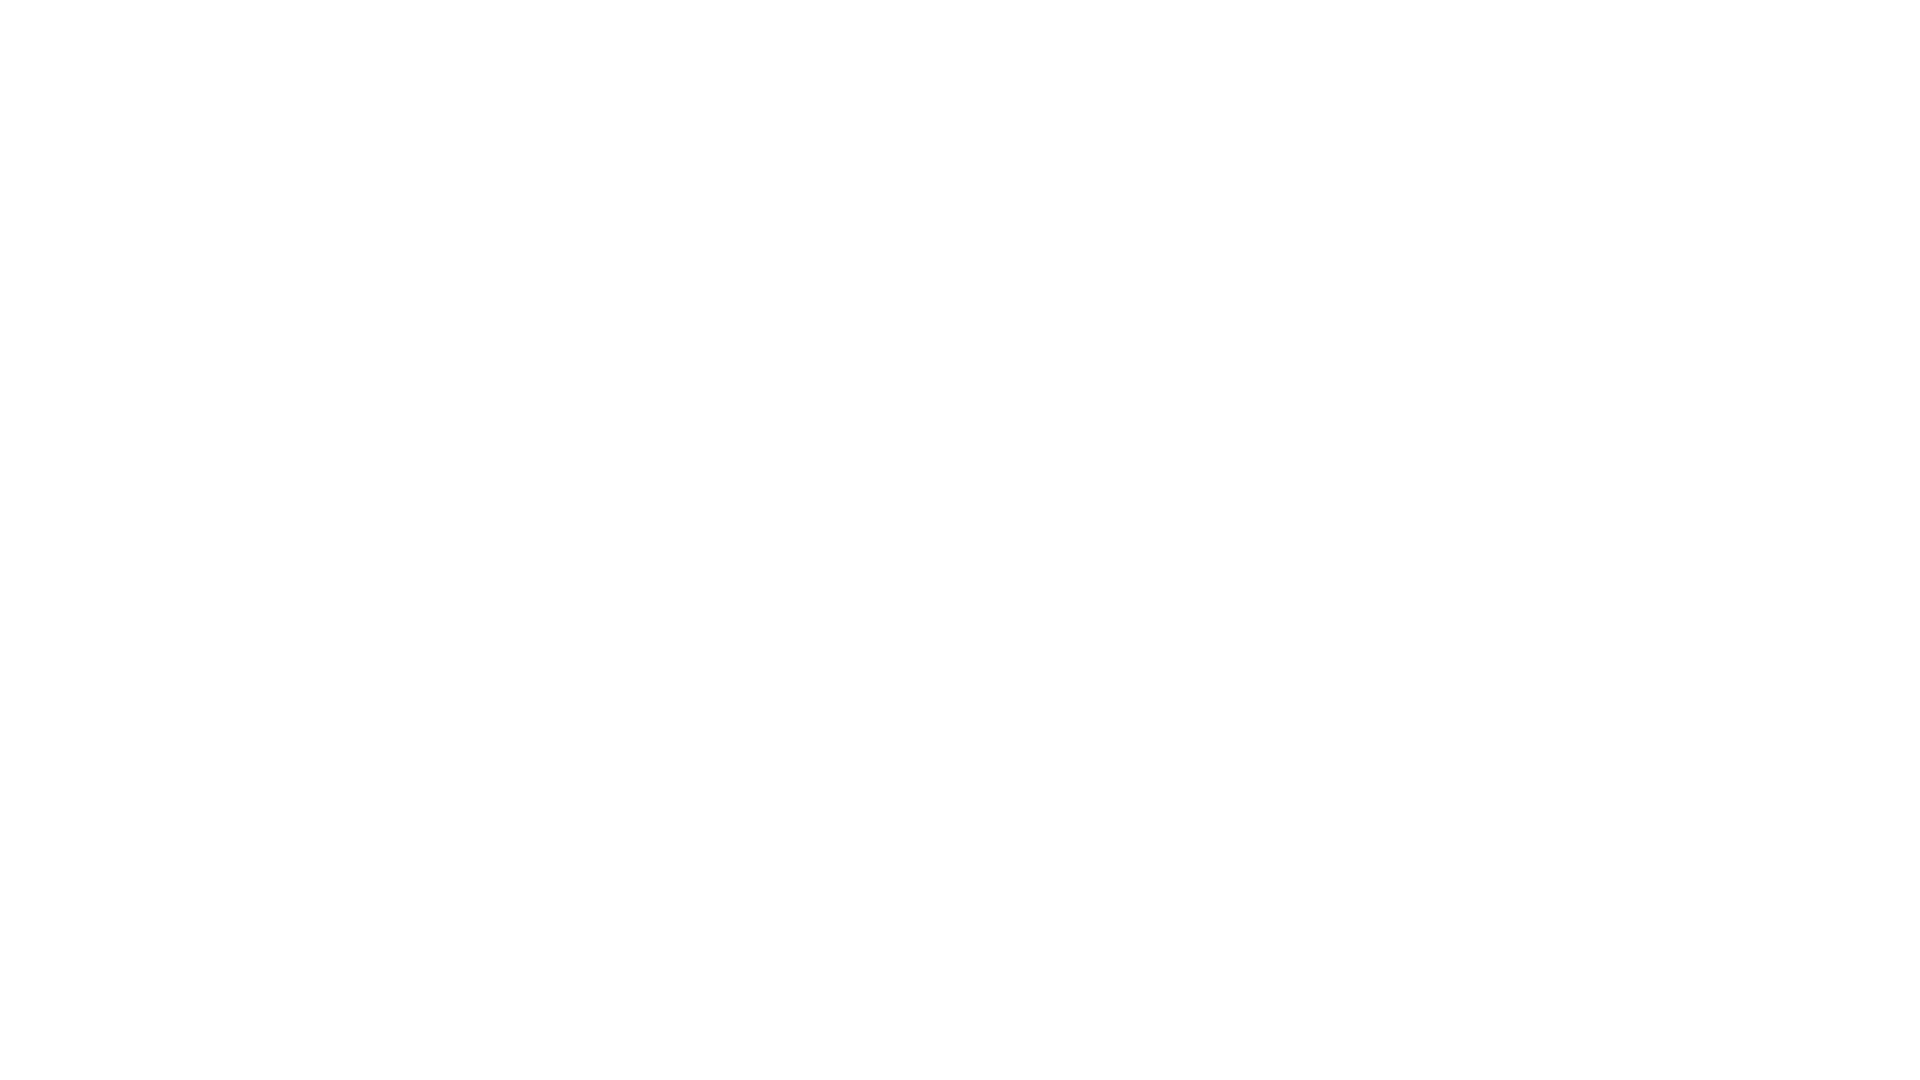 You Matter Mental Health Sticker by RISE Athletes